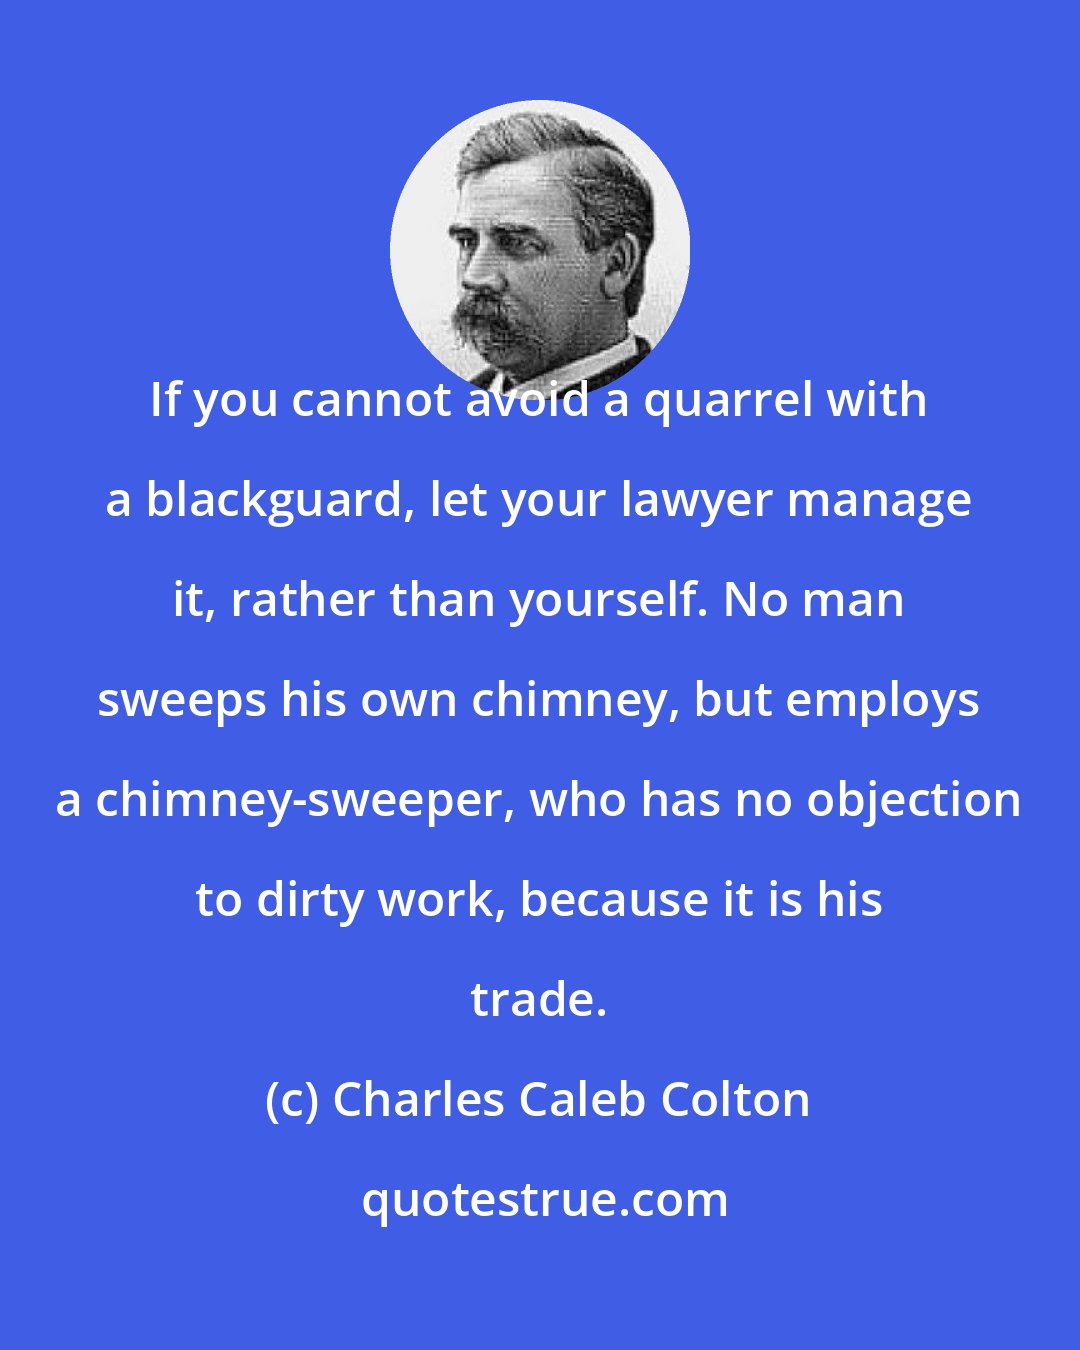 Charles Caleb Colton: If you cannot avoid a quarrel with a blackguard, let your lawyer manage it, rather than yourself. No man sweeps his own chimney, but employs a chimney-sweeper, who has no objection to dirty work, because it is his trade.